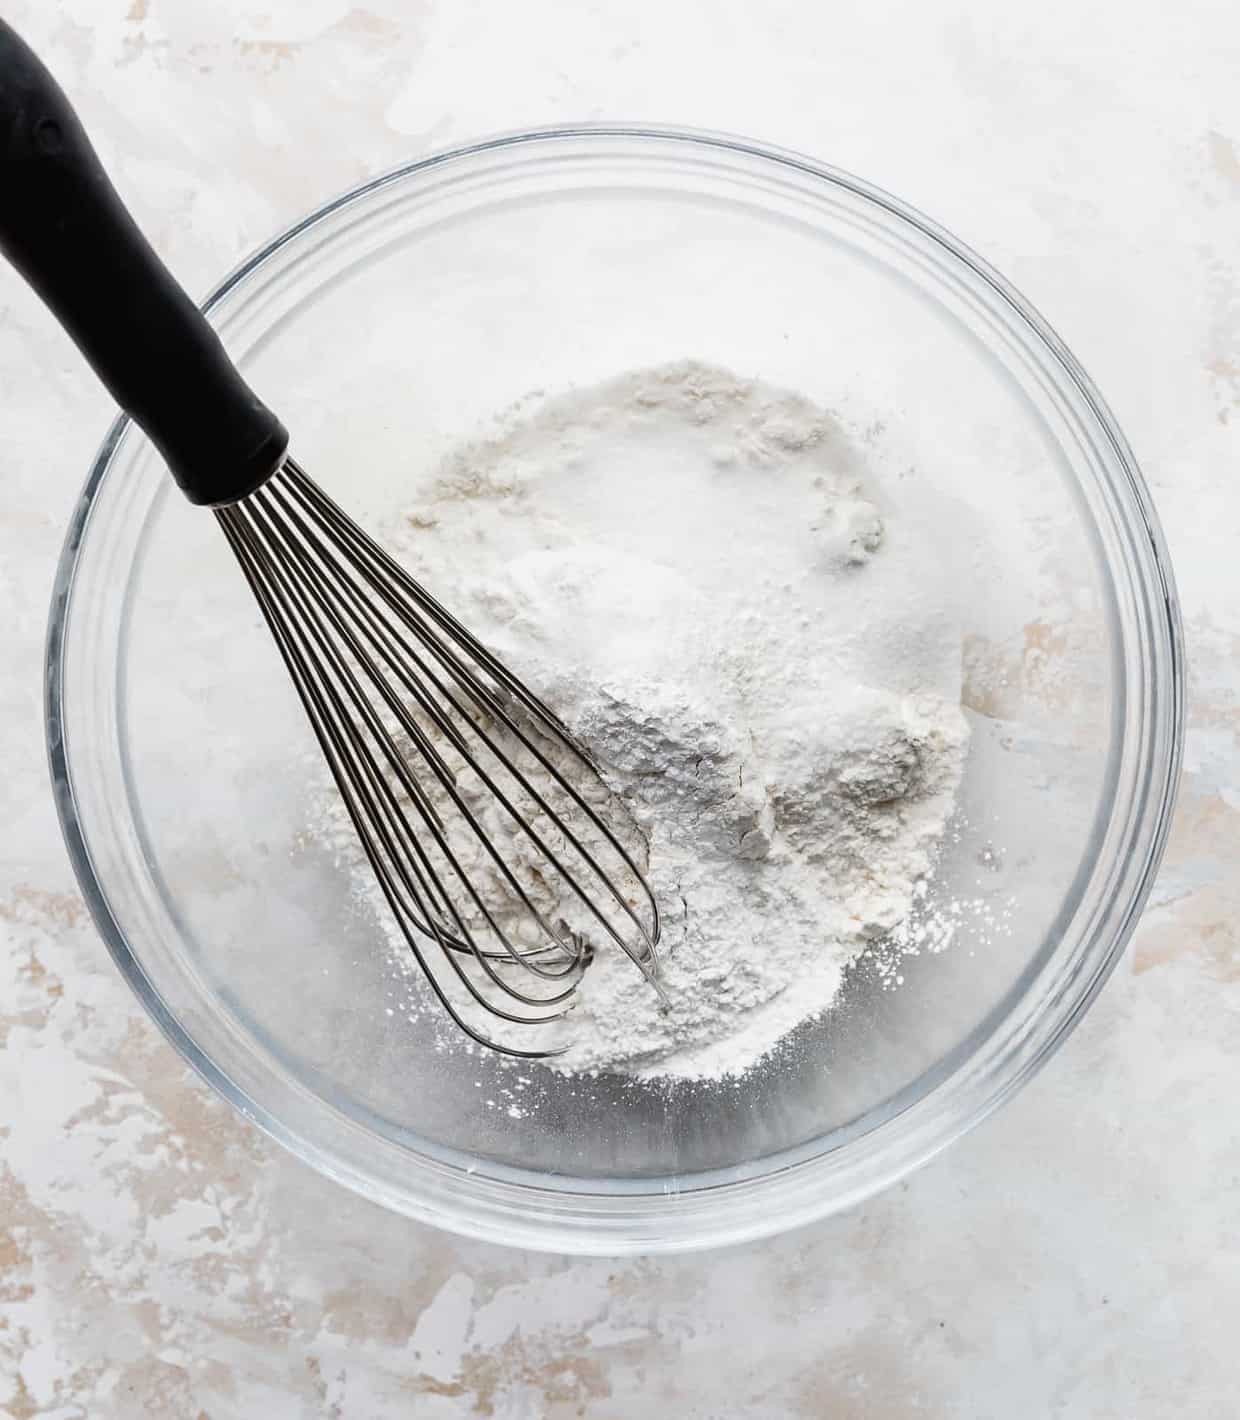 White dry ingredients in a glass bowl against a white background.